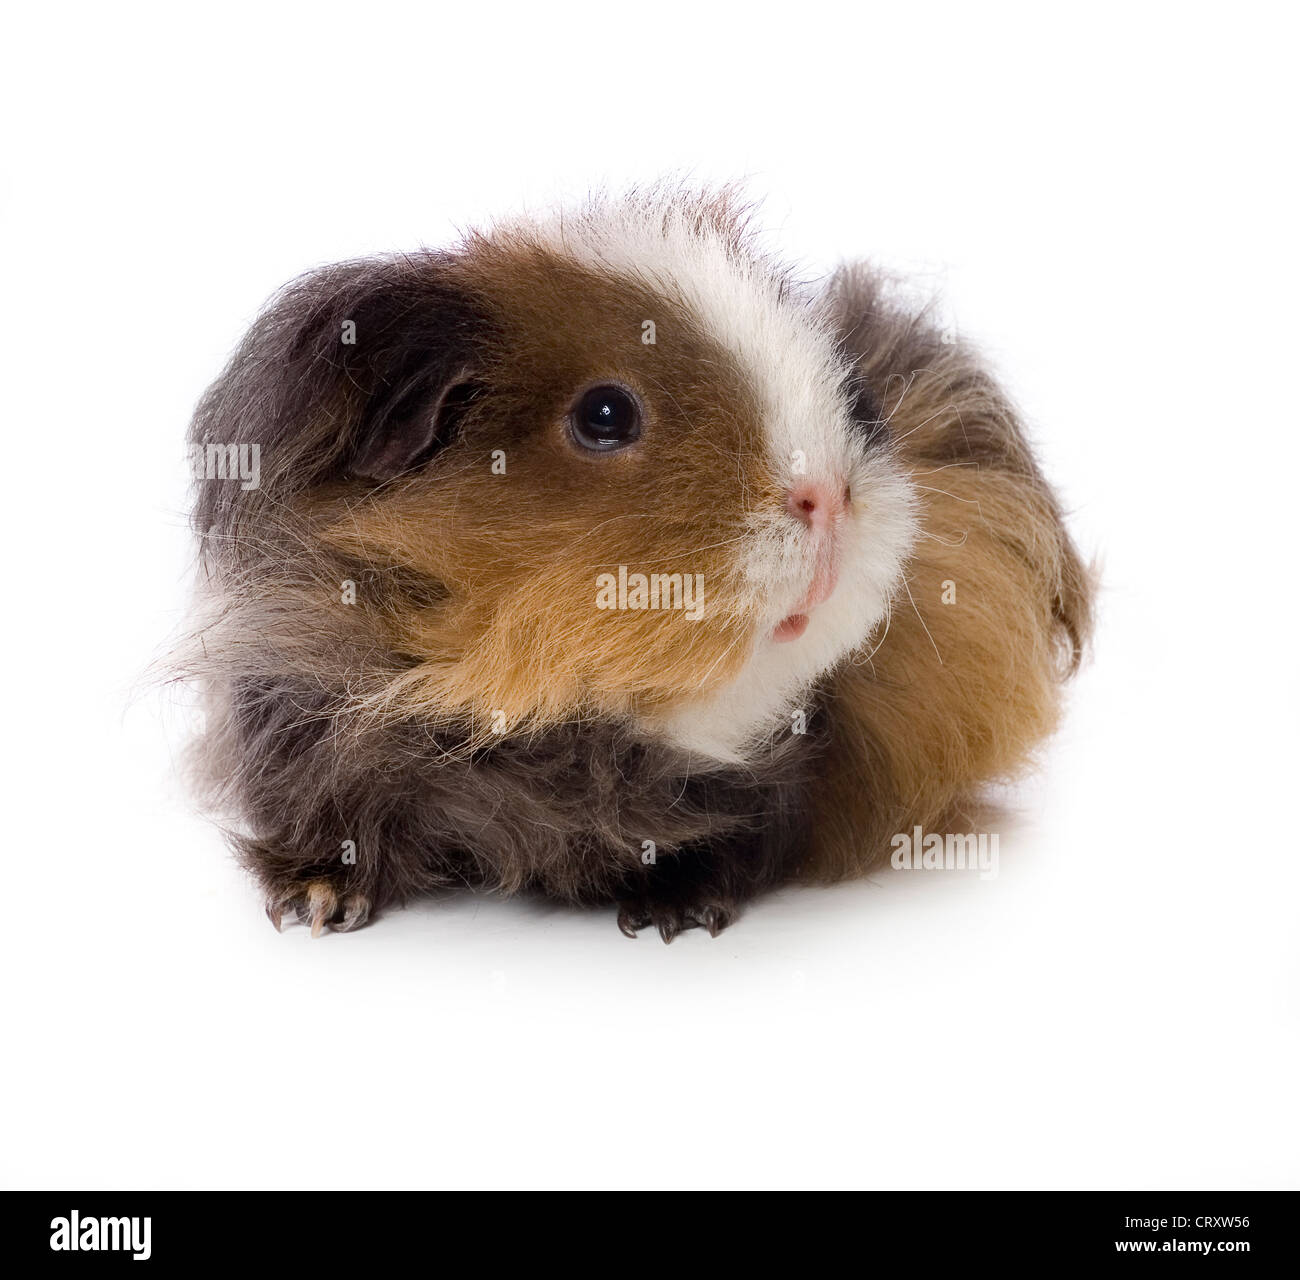 Long Haired Guinea Pig On White Background Stock Photo 49148322